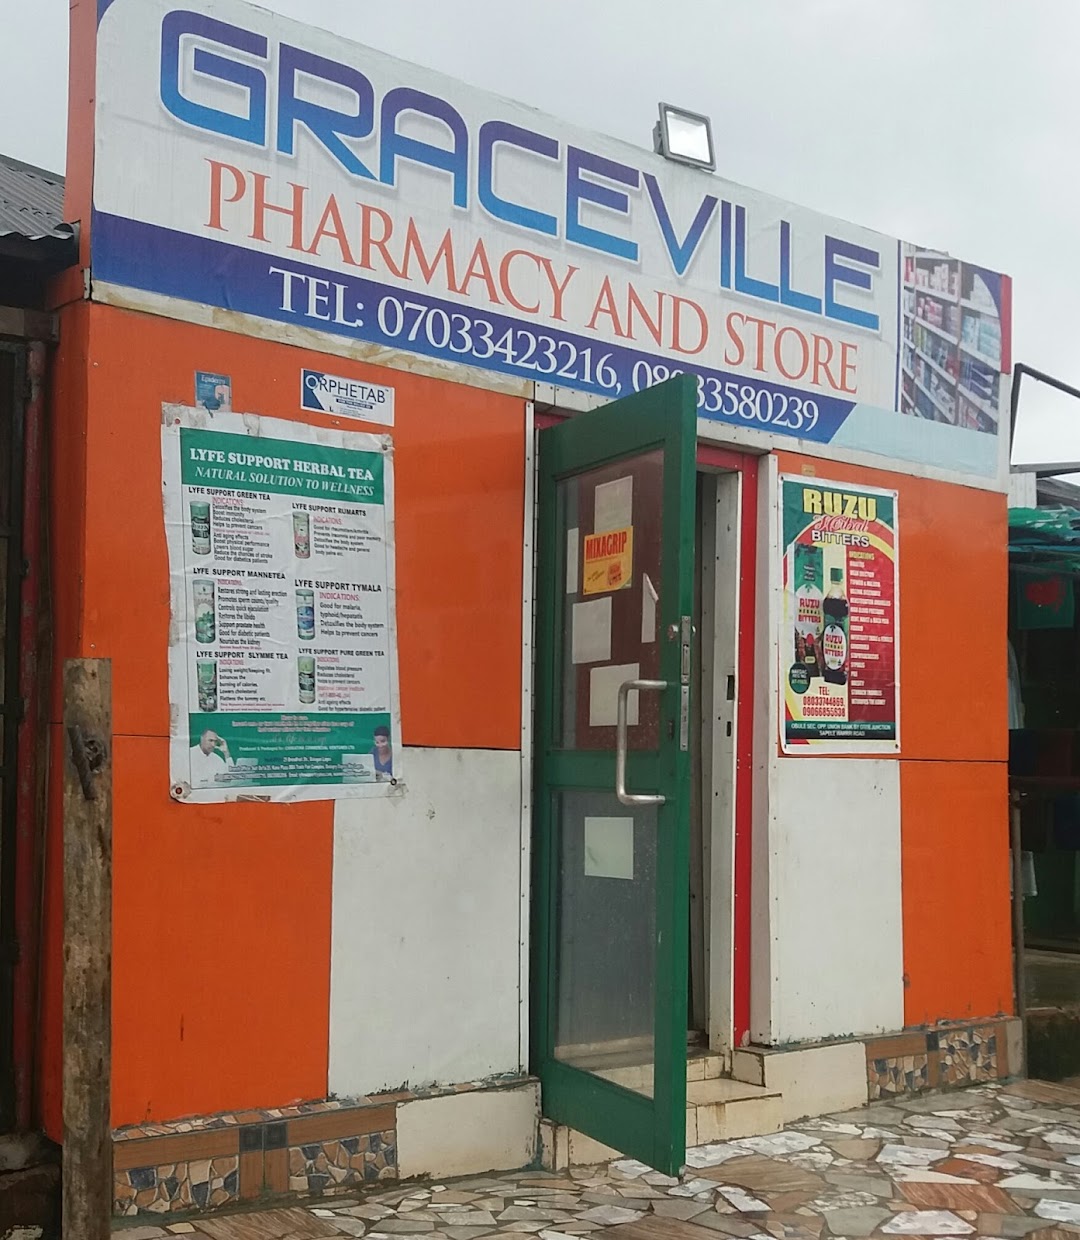 Graceville Pharmacy and Stores